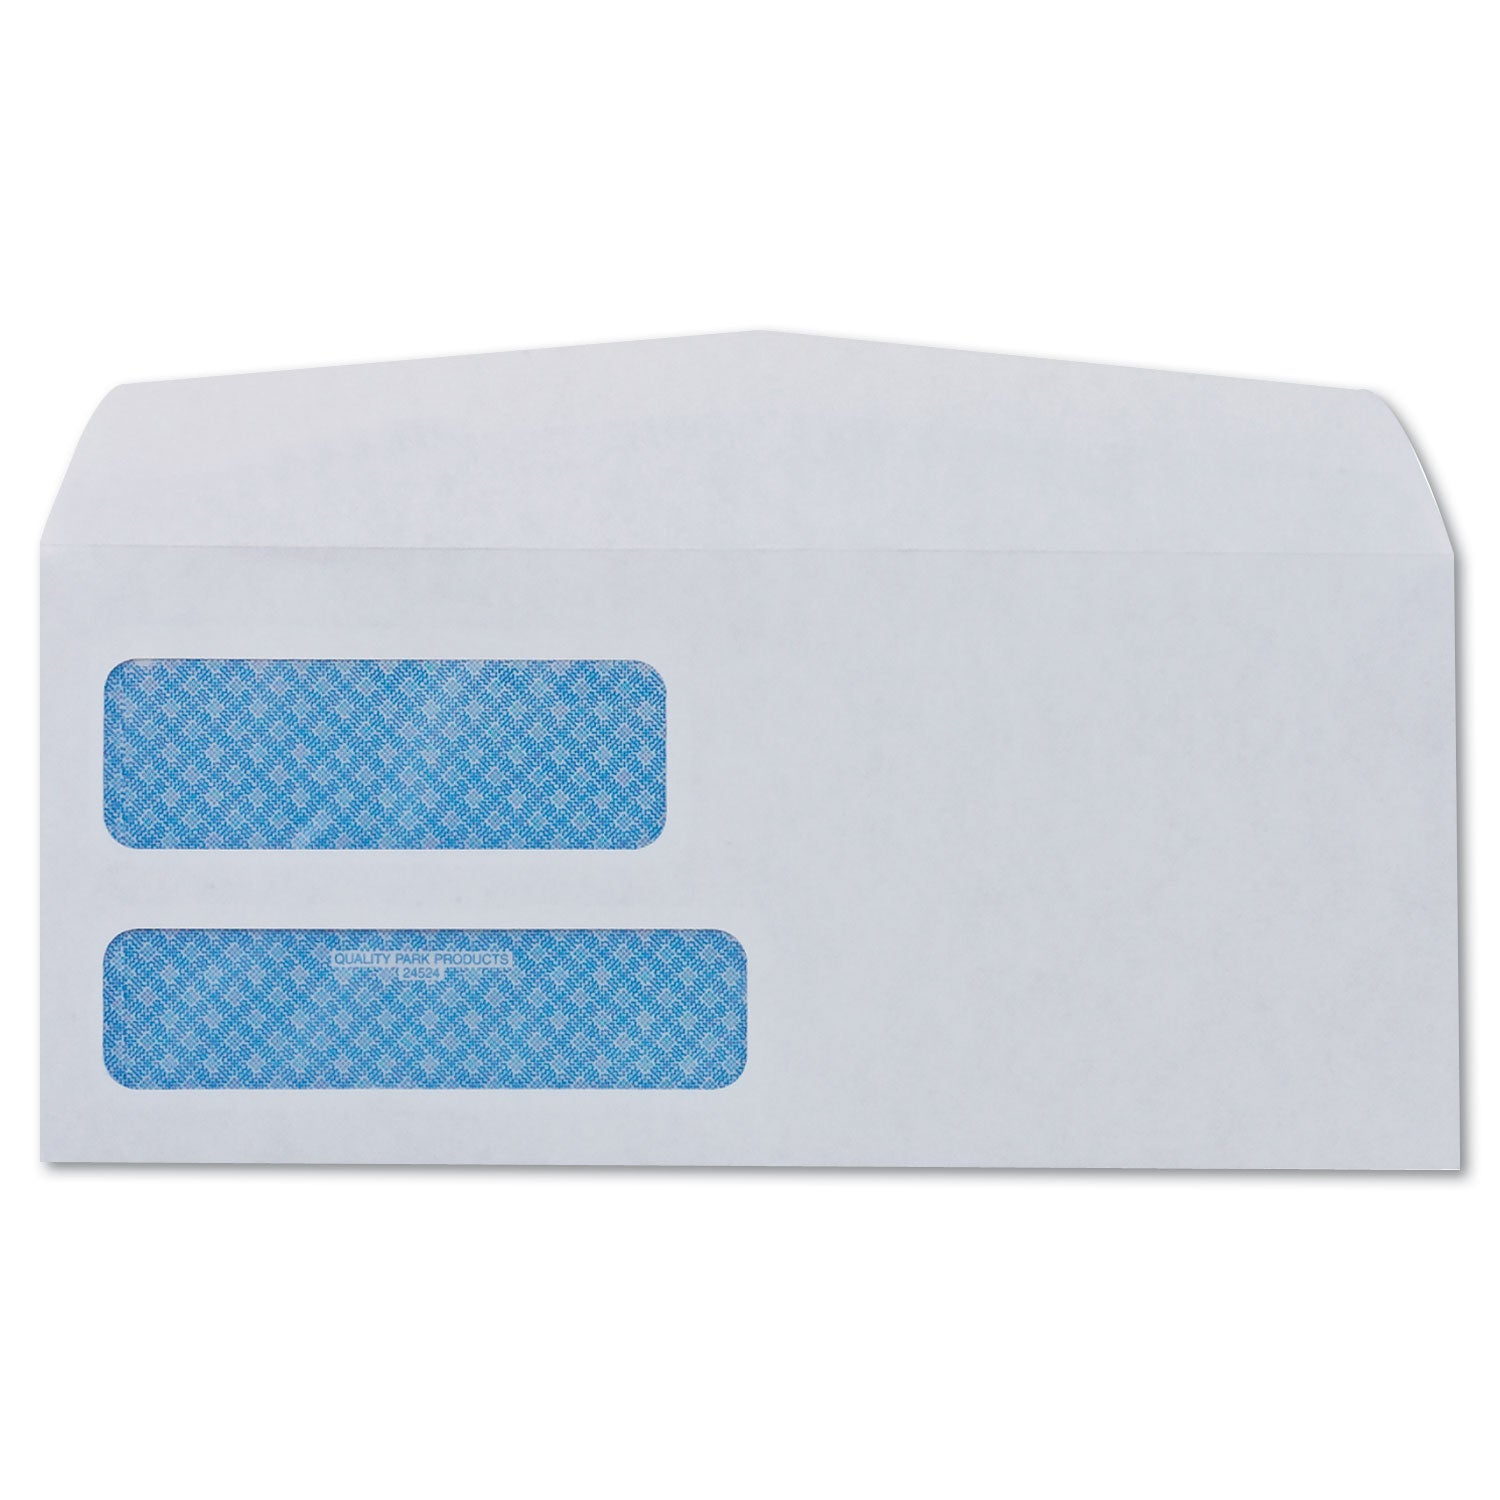 Double Window Security-Tinted Check Envelope, #8 5/8, Commercial Flap, Gummed Closure, 3.63 x 8.63, White, 500/Box - 